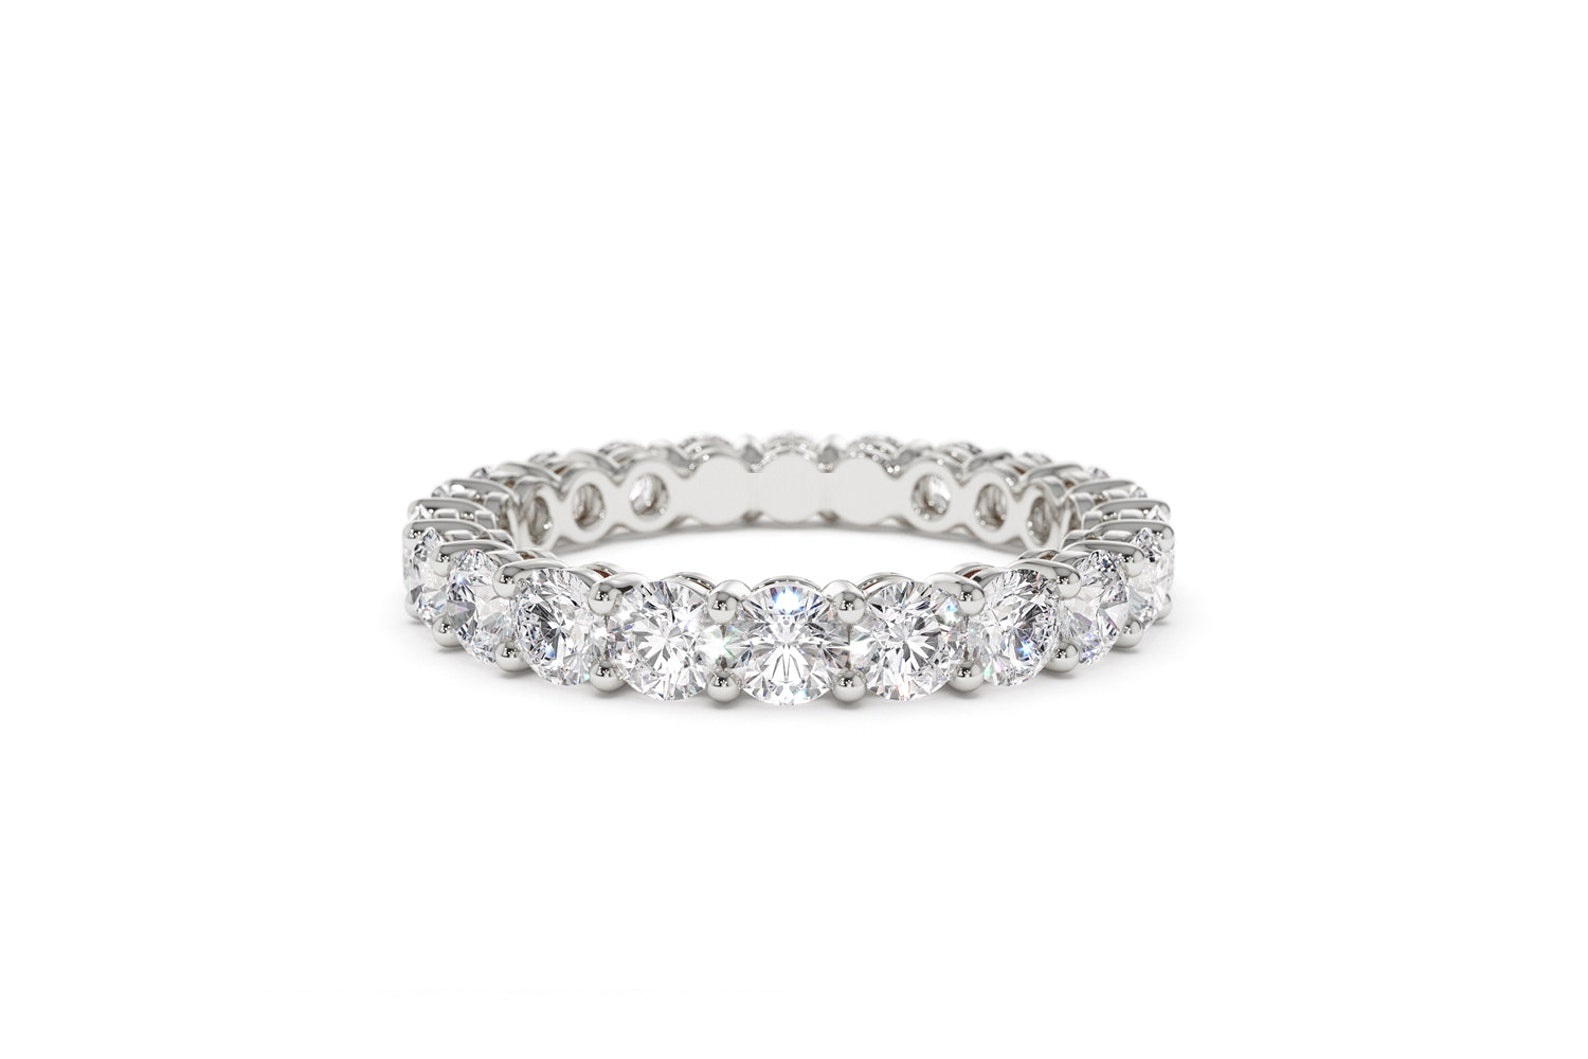 1.00 Carat F/SI Natural Round Cut Diamond Claw Set Full Eternity Ring in 9k White Gold